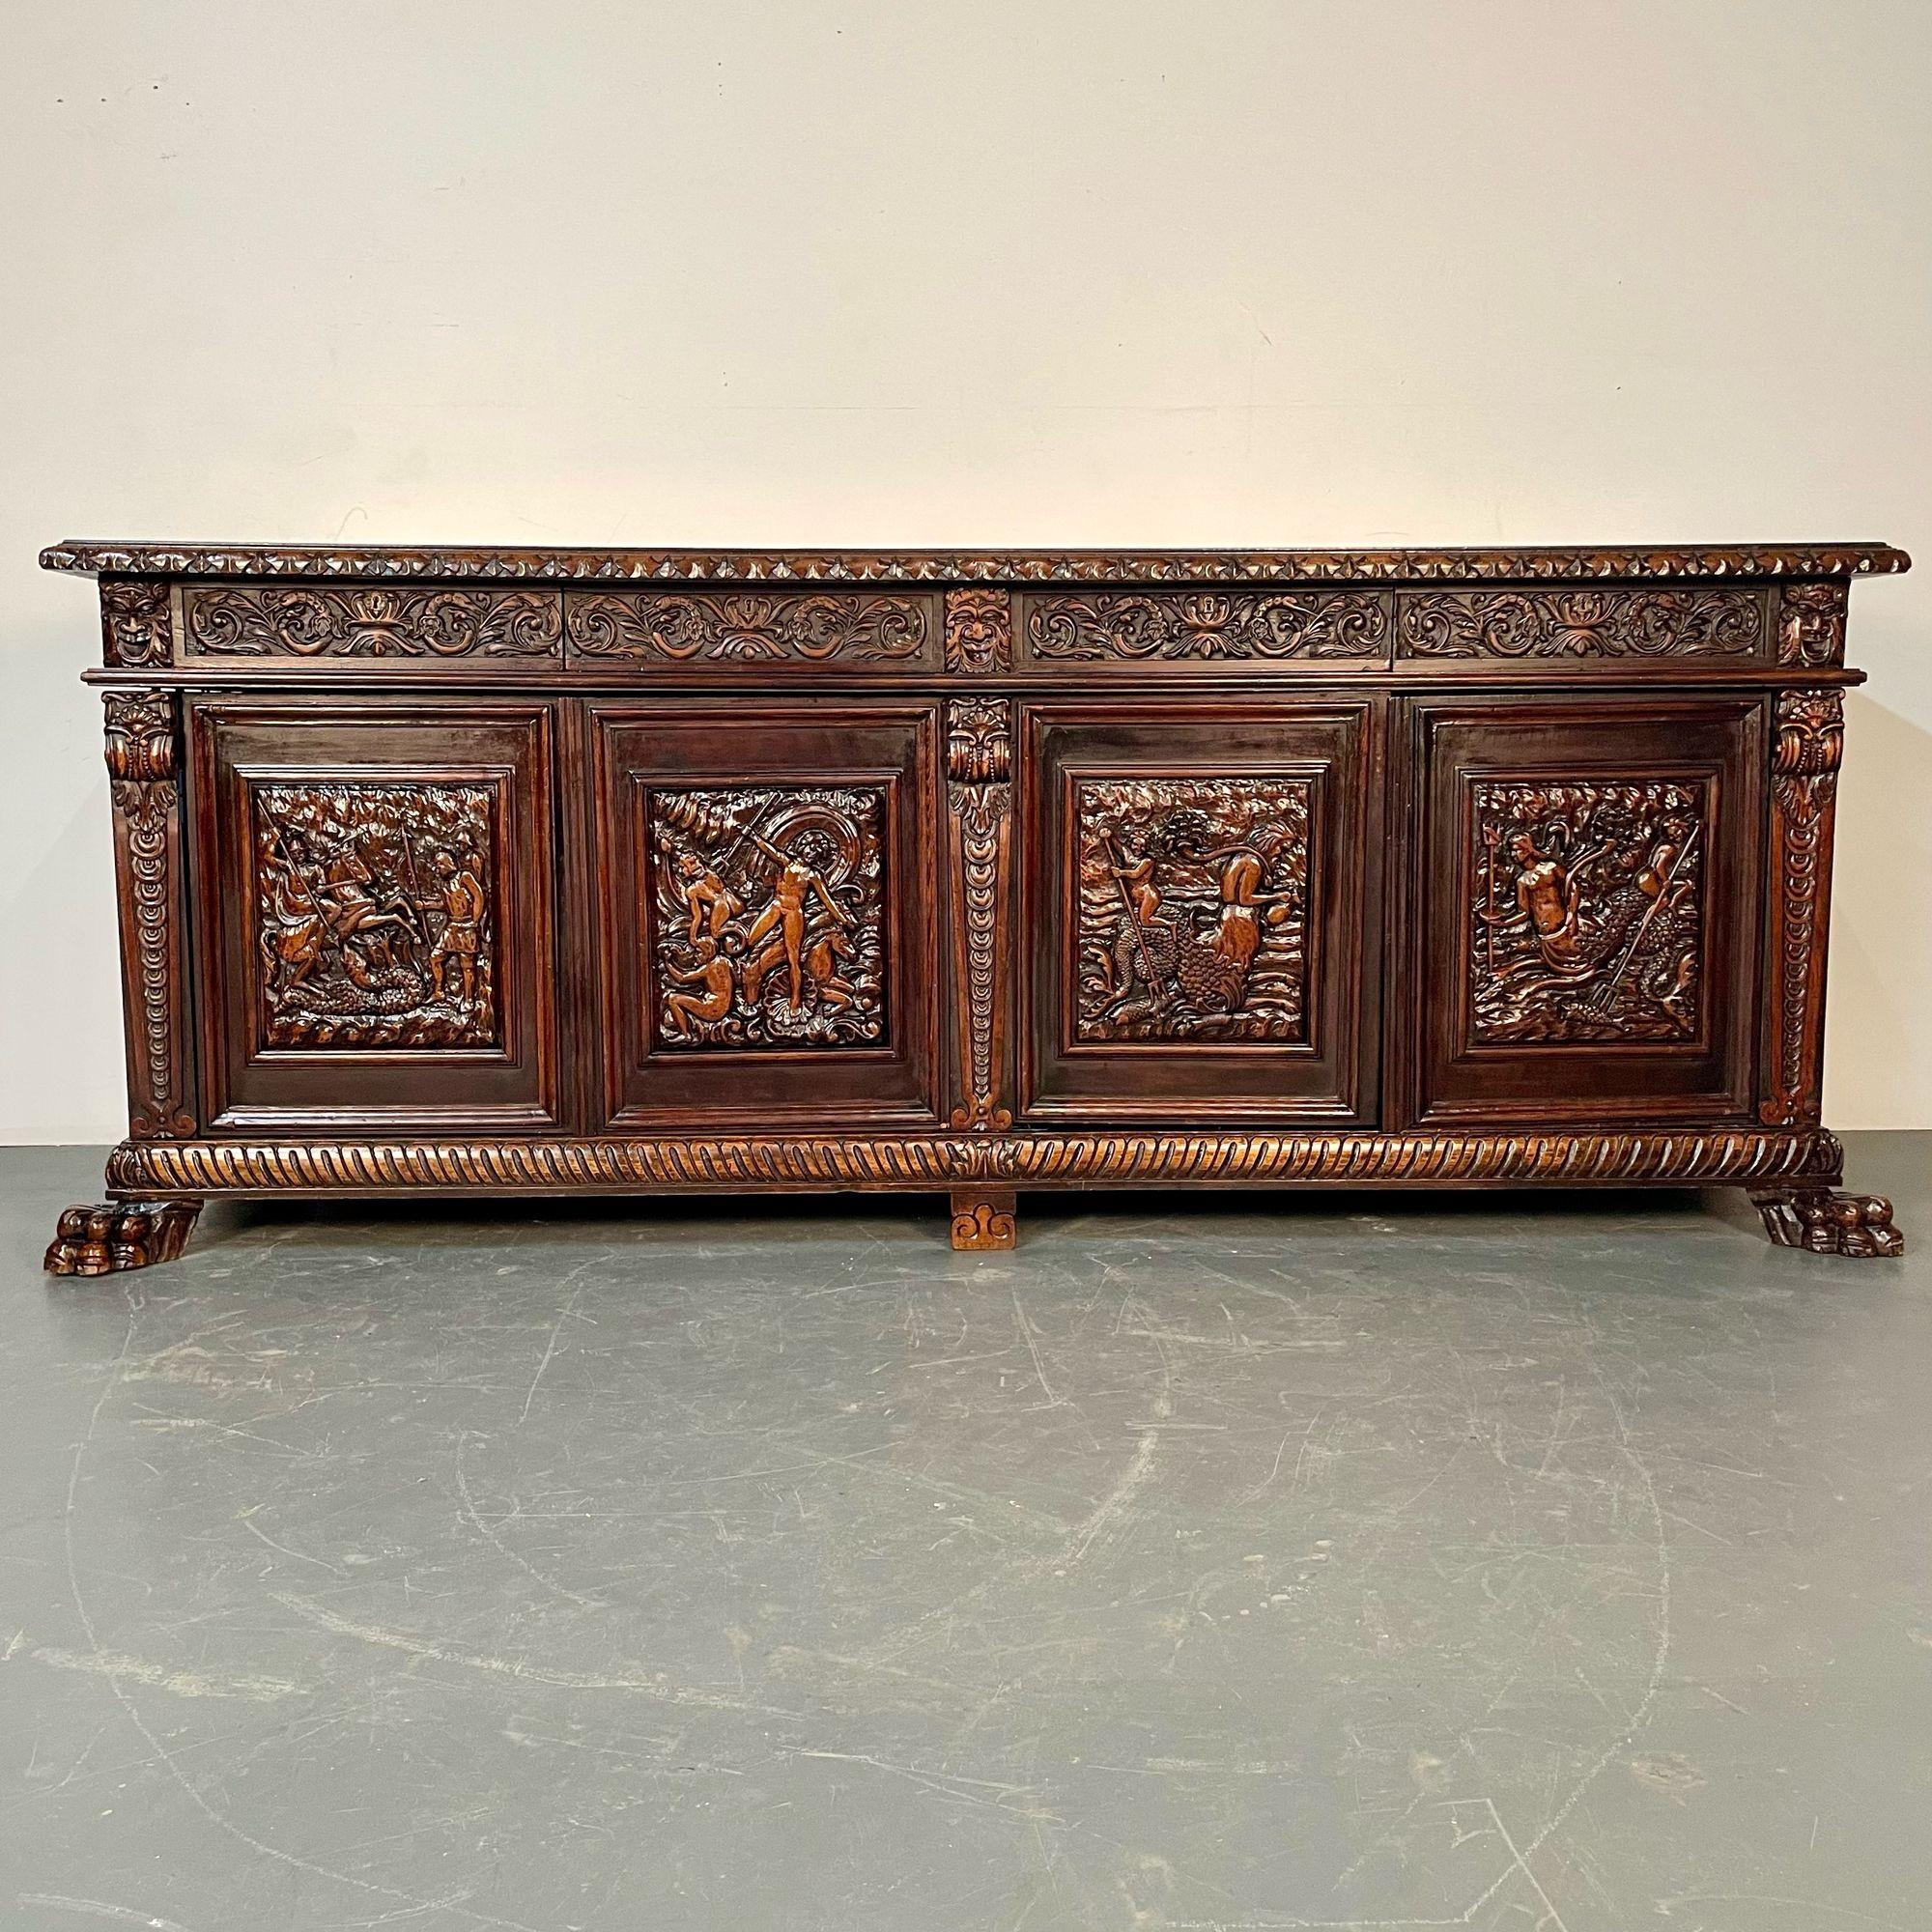 Monumental Renaissance Revival Sideboard, Heavily Carved, Mahogany, Branded

A simply stunning ornately carved cabinet telling a story of mermaids, warriors and mythological figures. A monumental renaissance revival sideboard like none other.